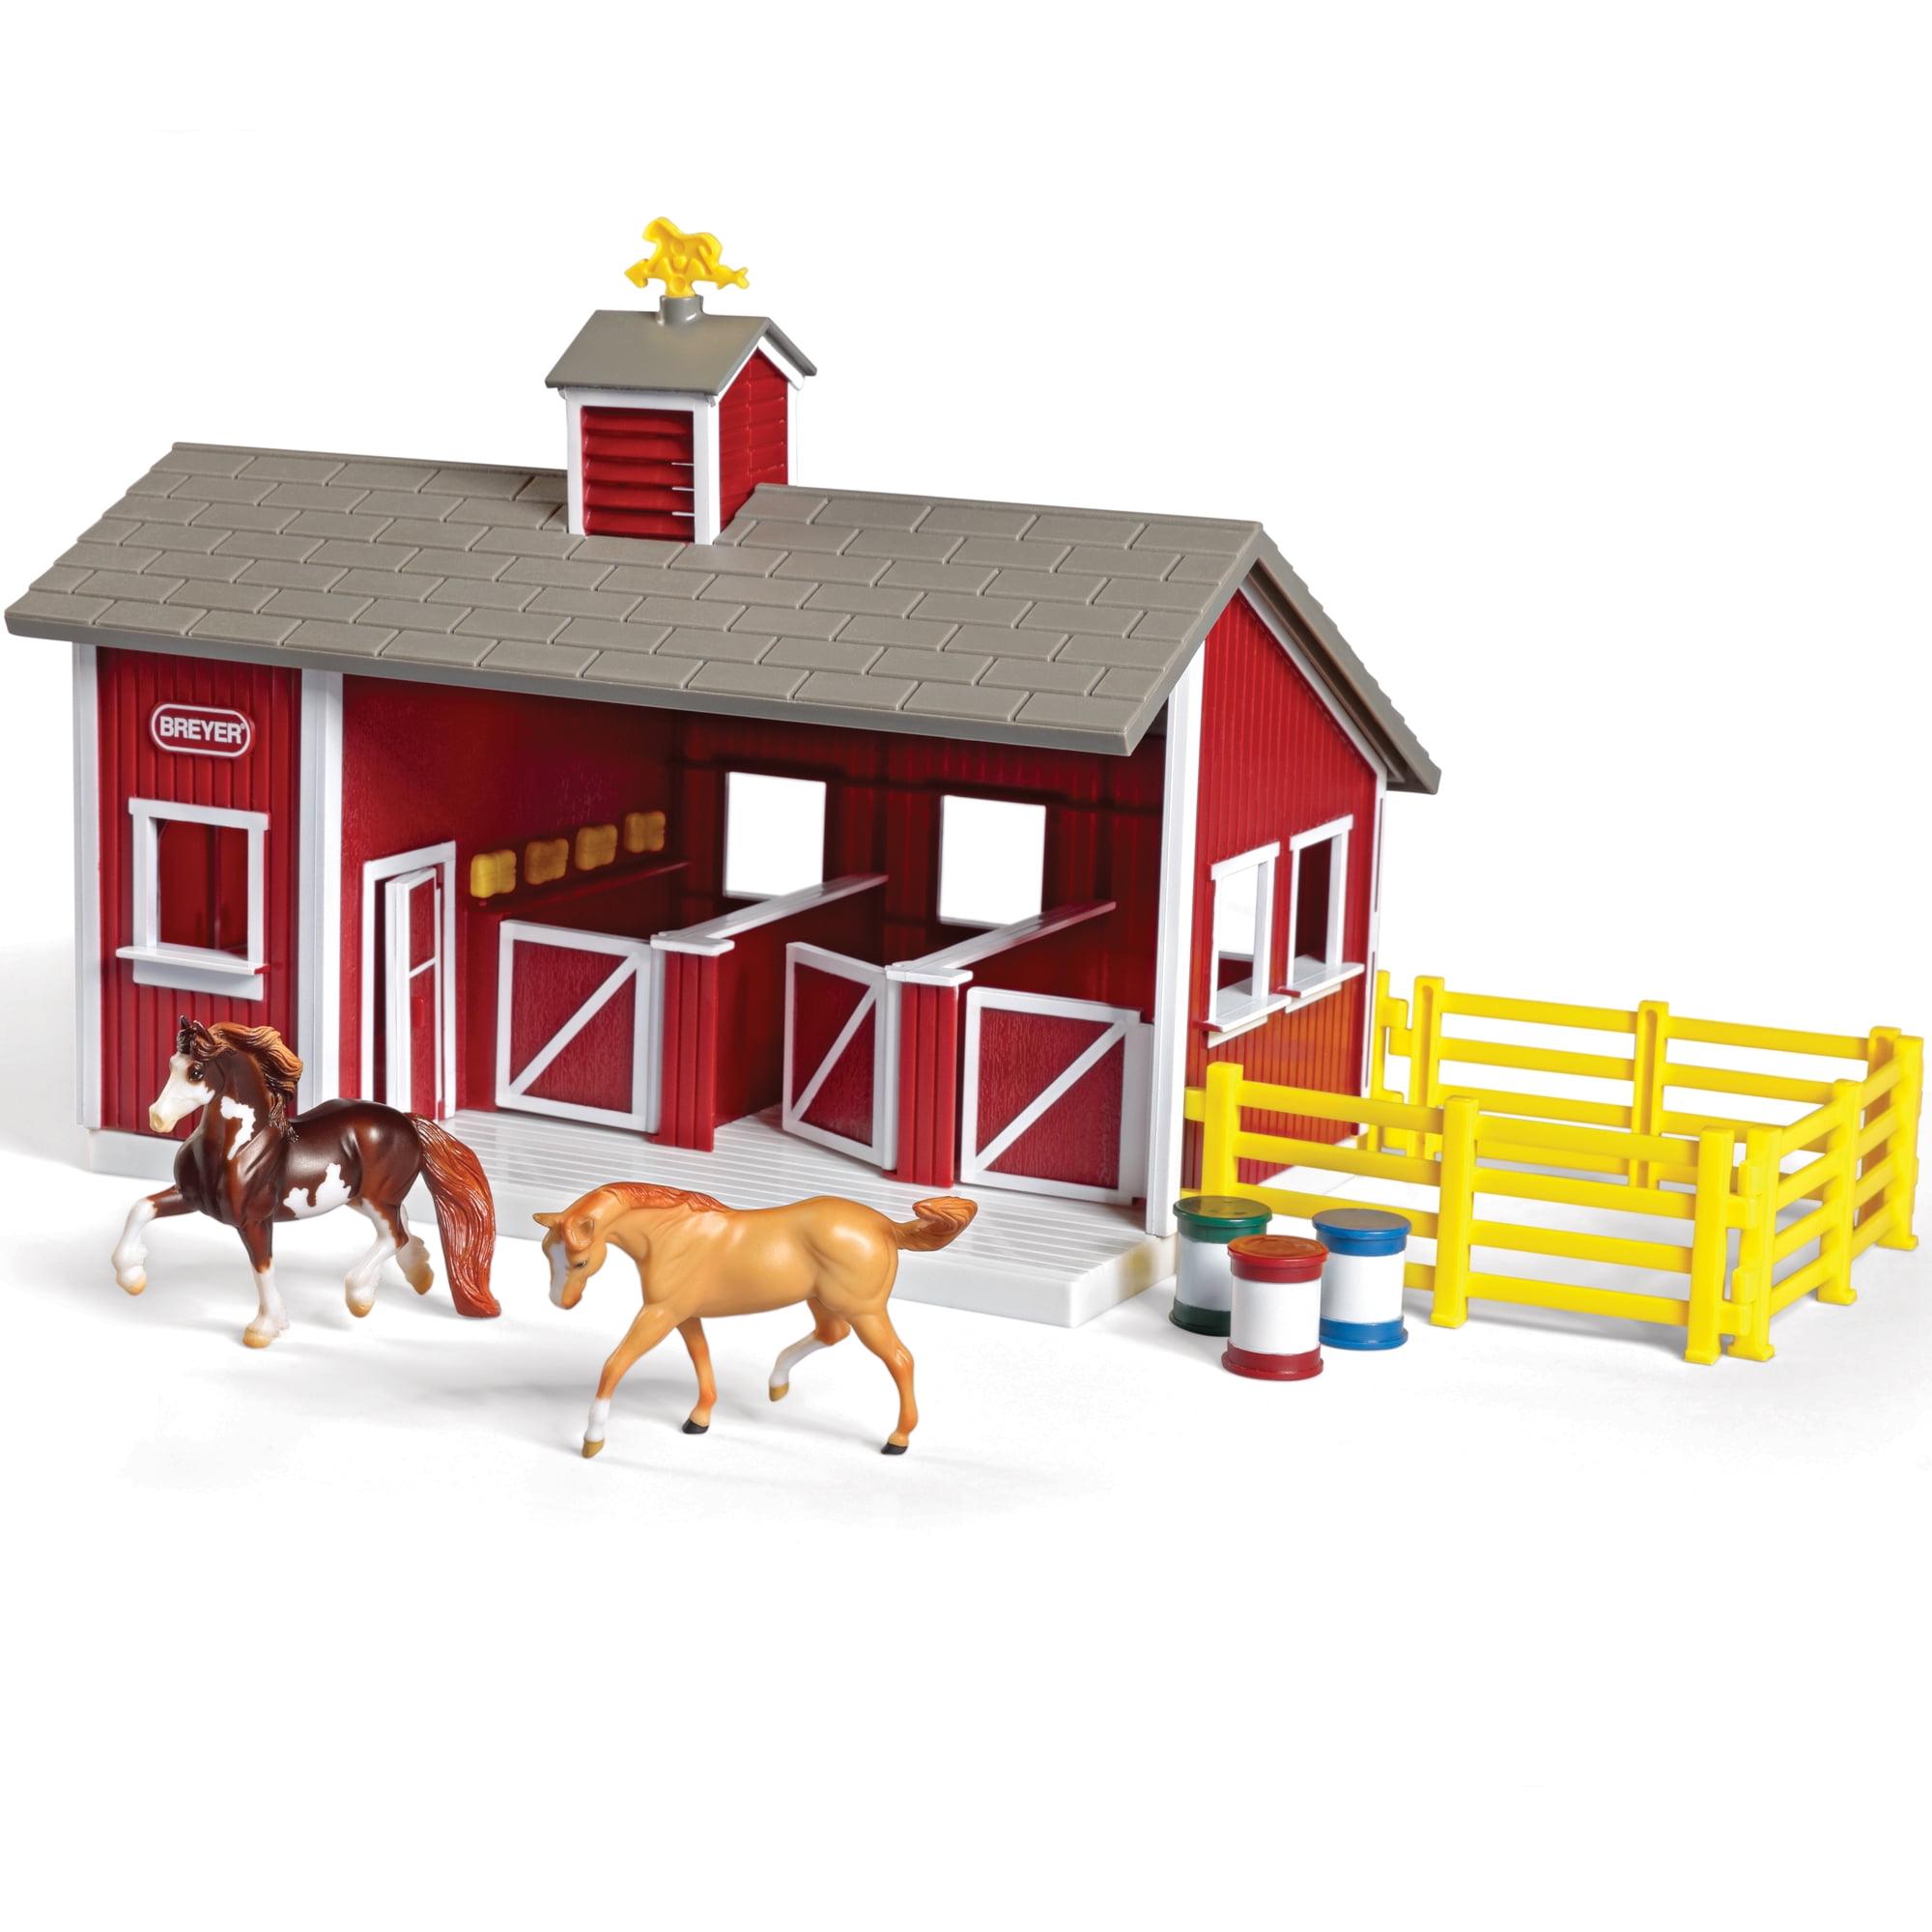 Breyer Horses Traditional Size Stable Accessories Feed Set #2486 Horse Barn Tool 